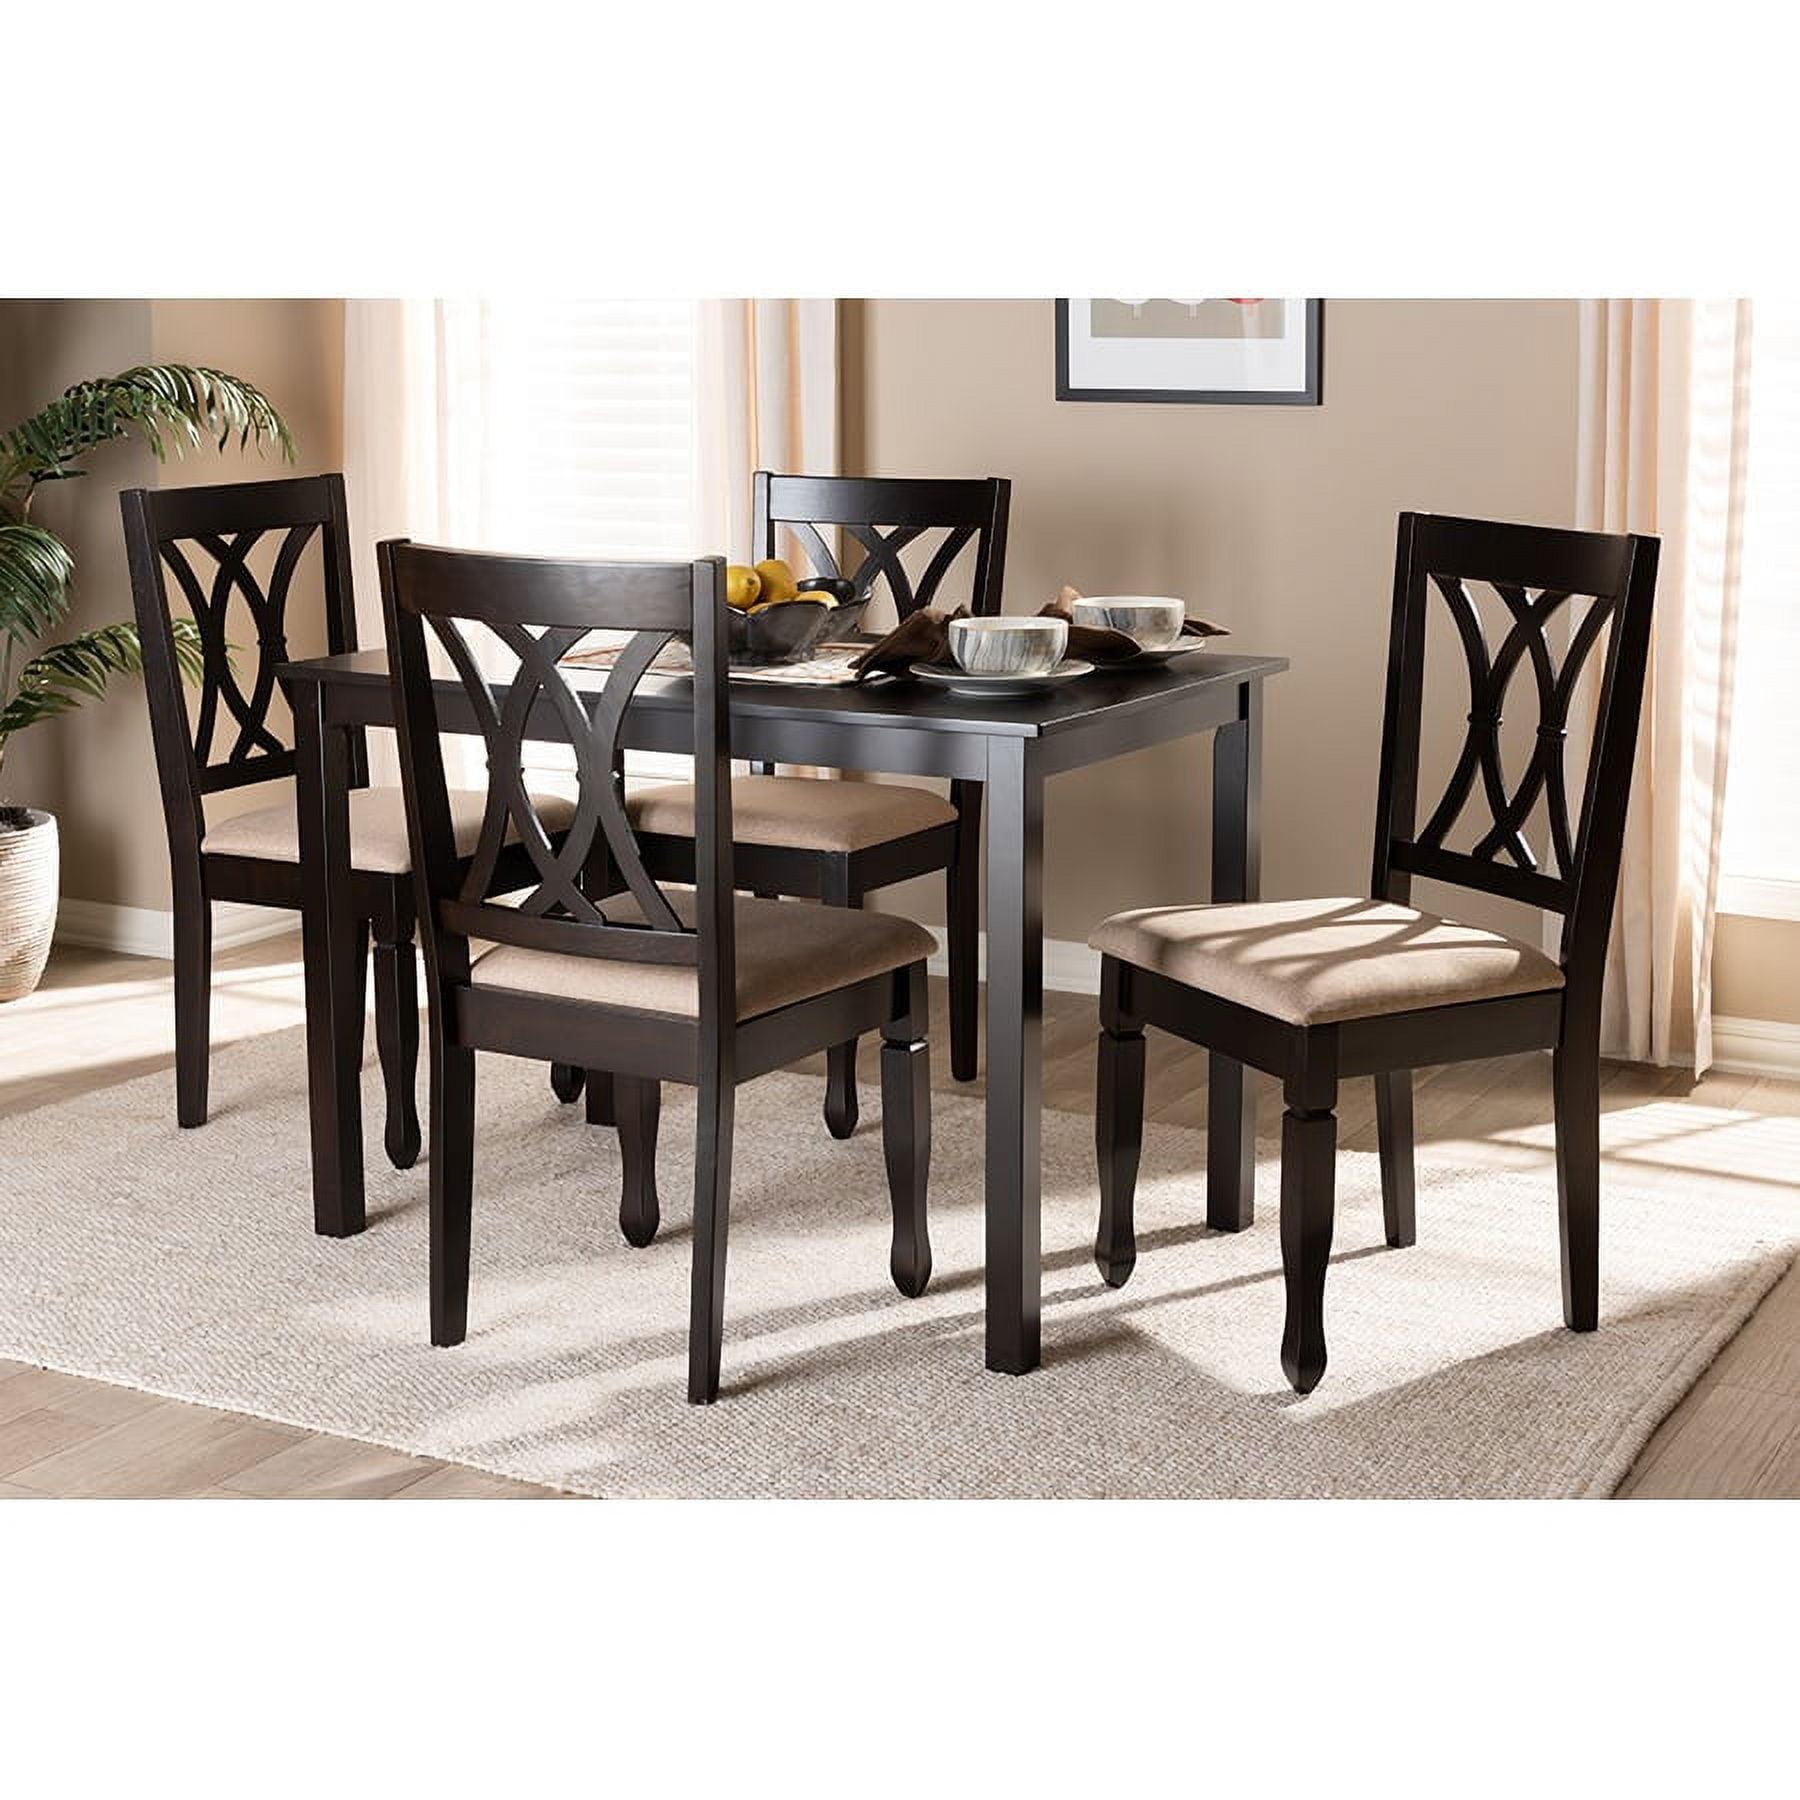 Espresso Brown and Sand Fabric 5-Piece Dining Set with Cut-Out Chair Design